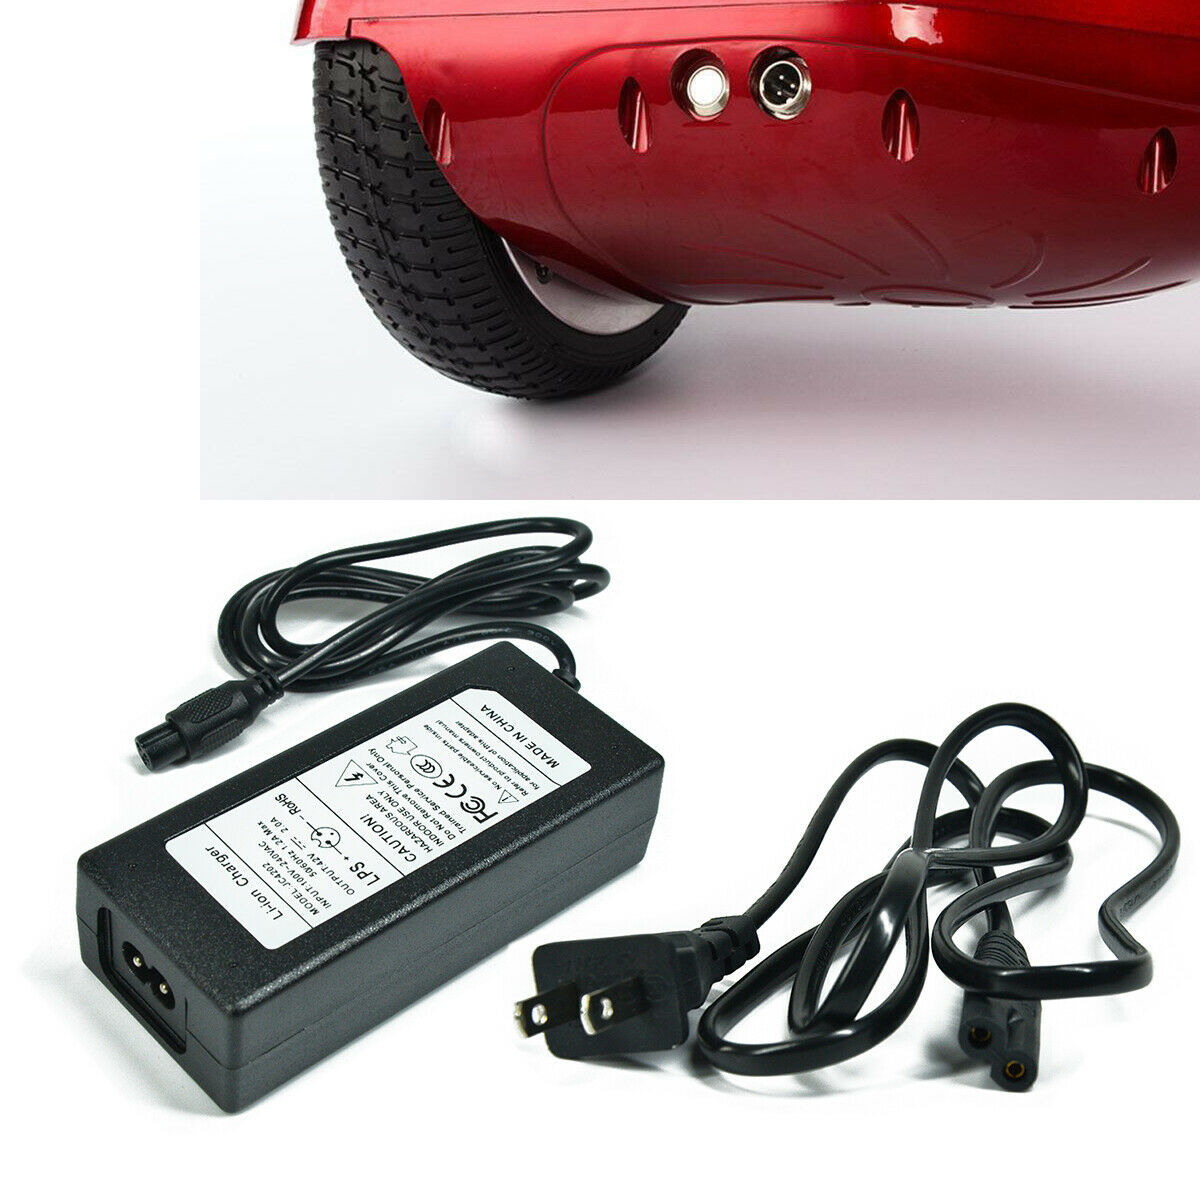 New Charger 42V 2A Adapter For Hoverboard Smart Balance Scooter Wheel Universal Input:: AC 100-240V 50/60Hz MPN: